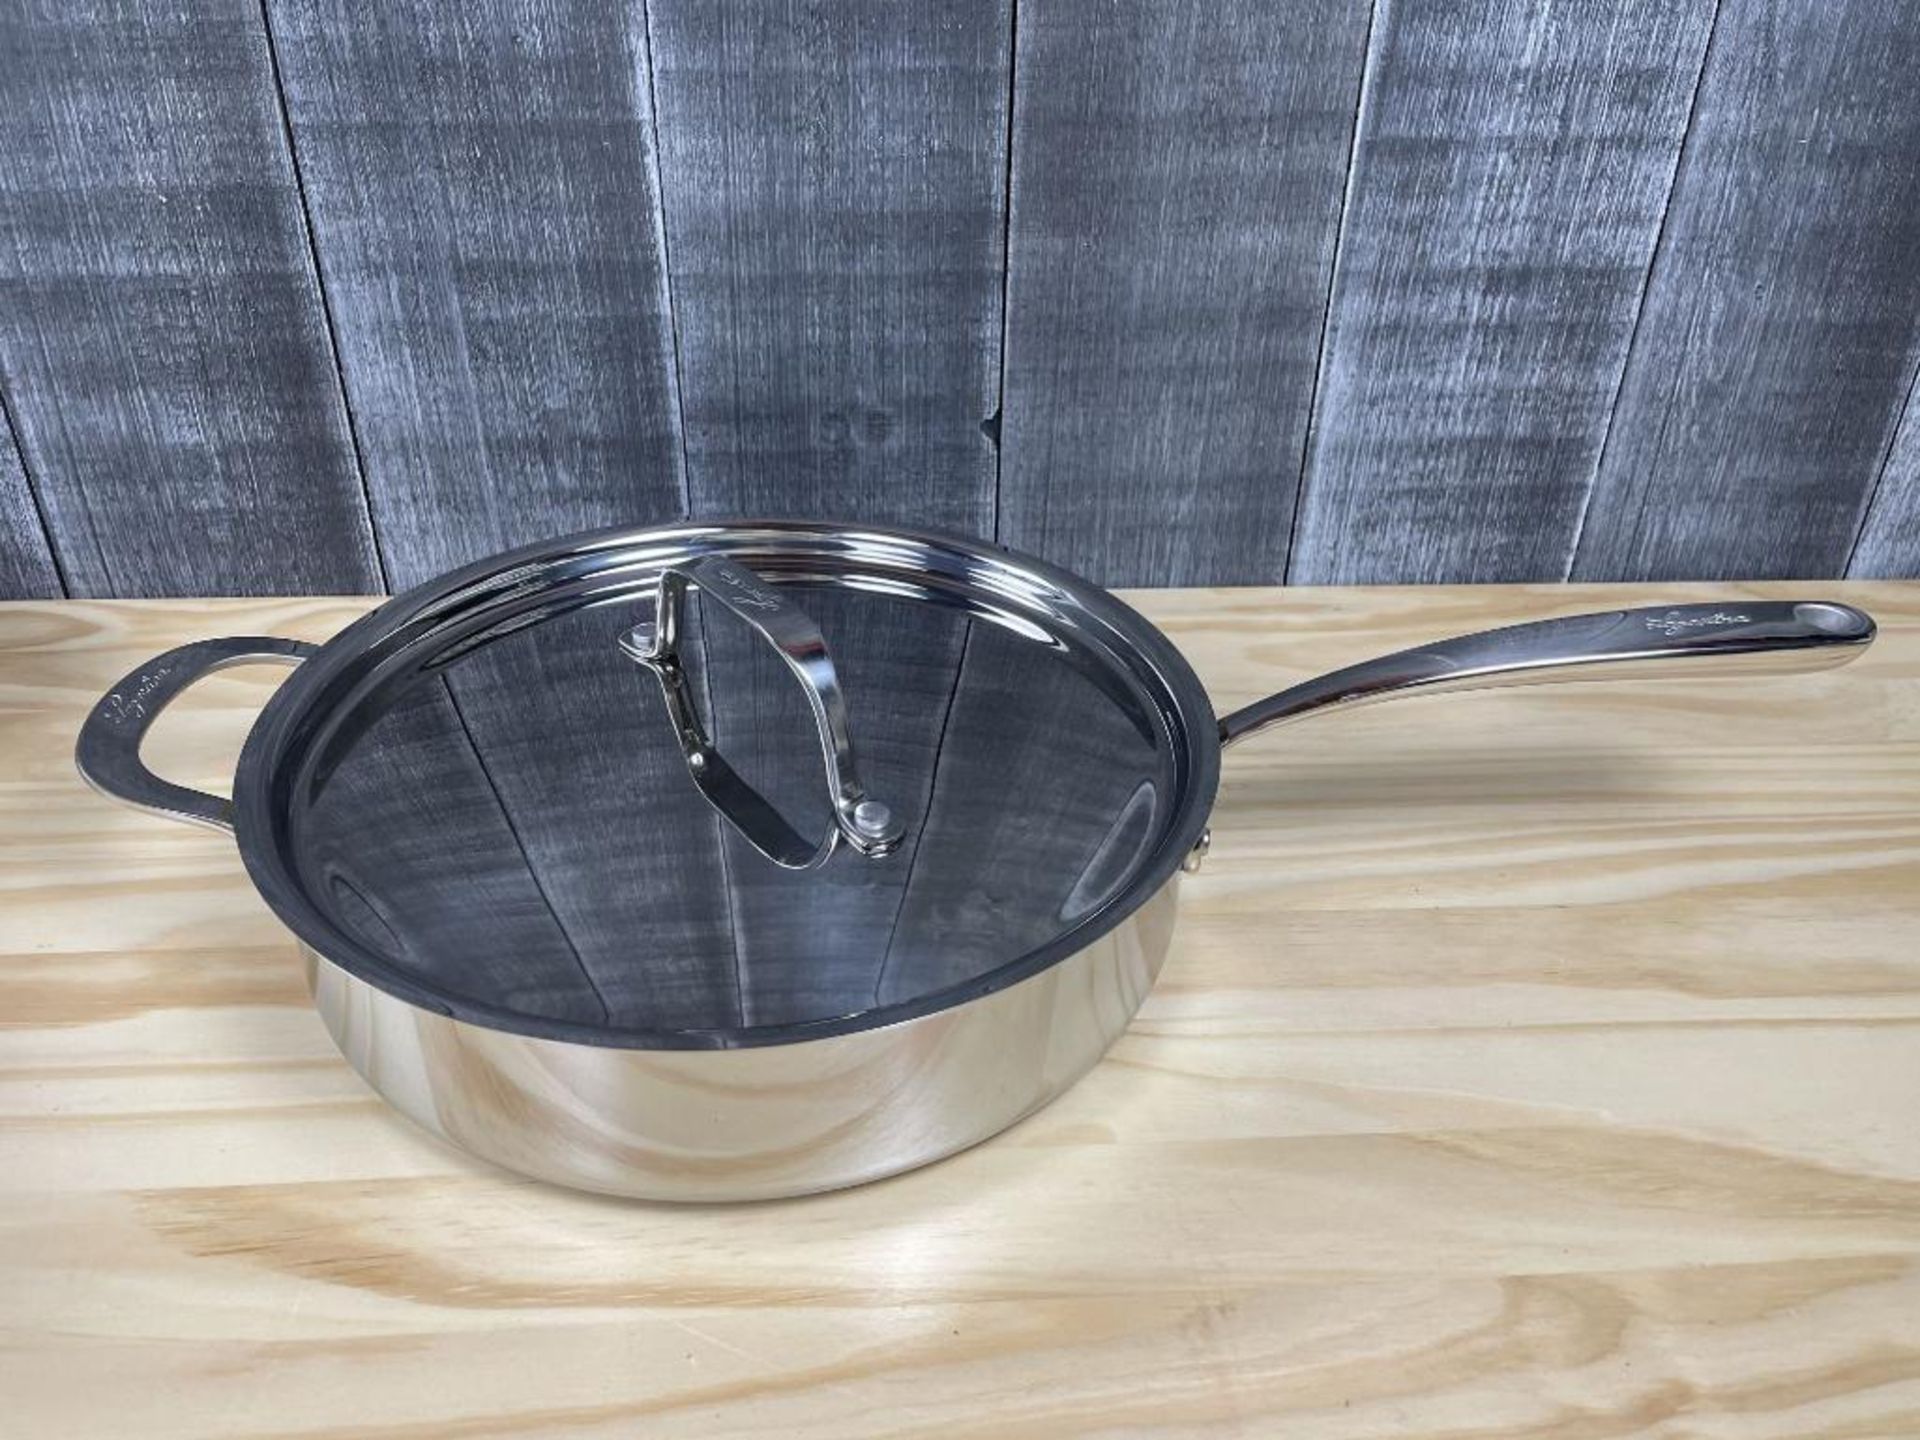 LAGOSTINA 3-PLY STAINLESS STEEL CLAD 3.4L SAUTE PAN WITH COVER - Image 2 of 3